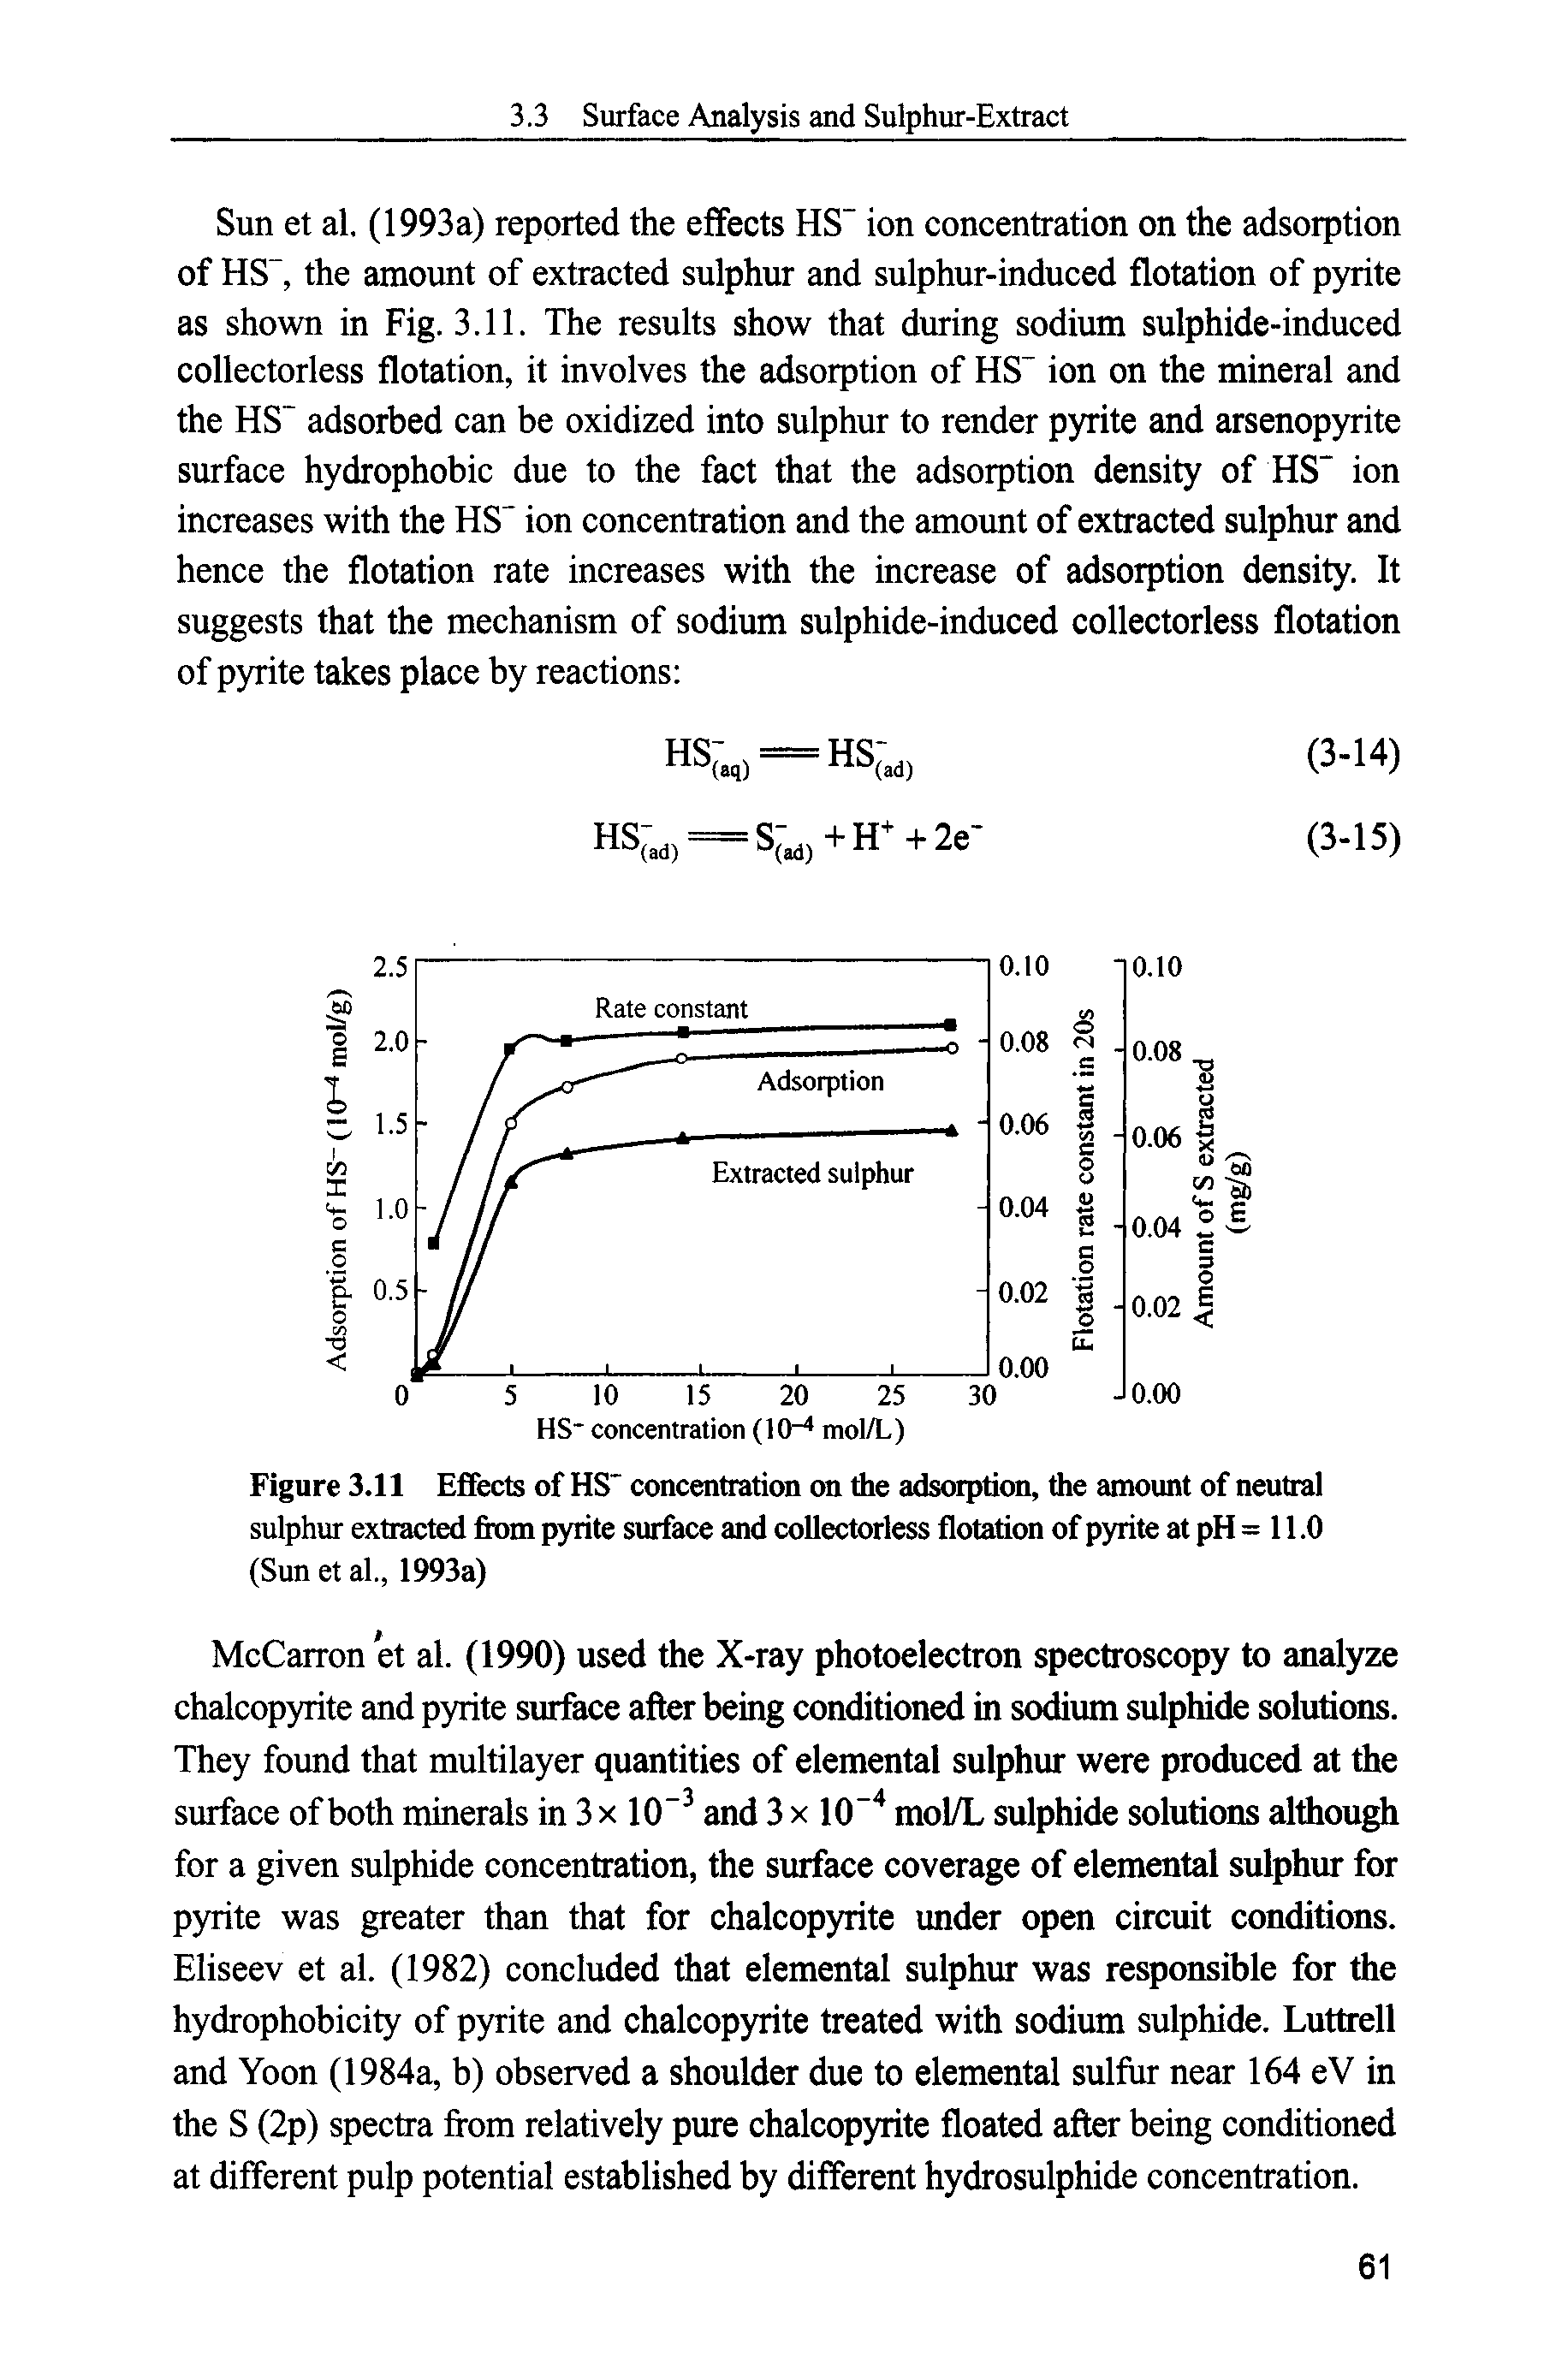 Figure 3.11 Effects of HS" concentration on the adsorption, the amount of neutral sulphur extracted fiom pyrite surface and collectorless flotation of pyrite at pH = 11.0 (Sun et al., 1993a)...